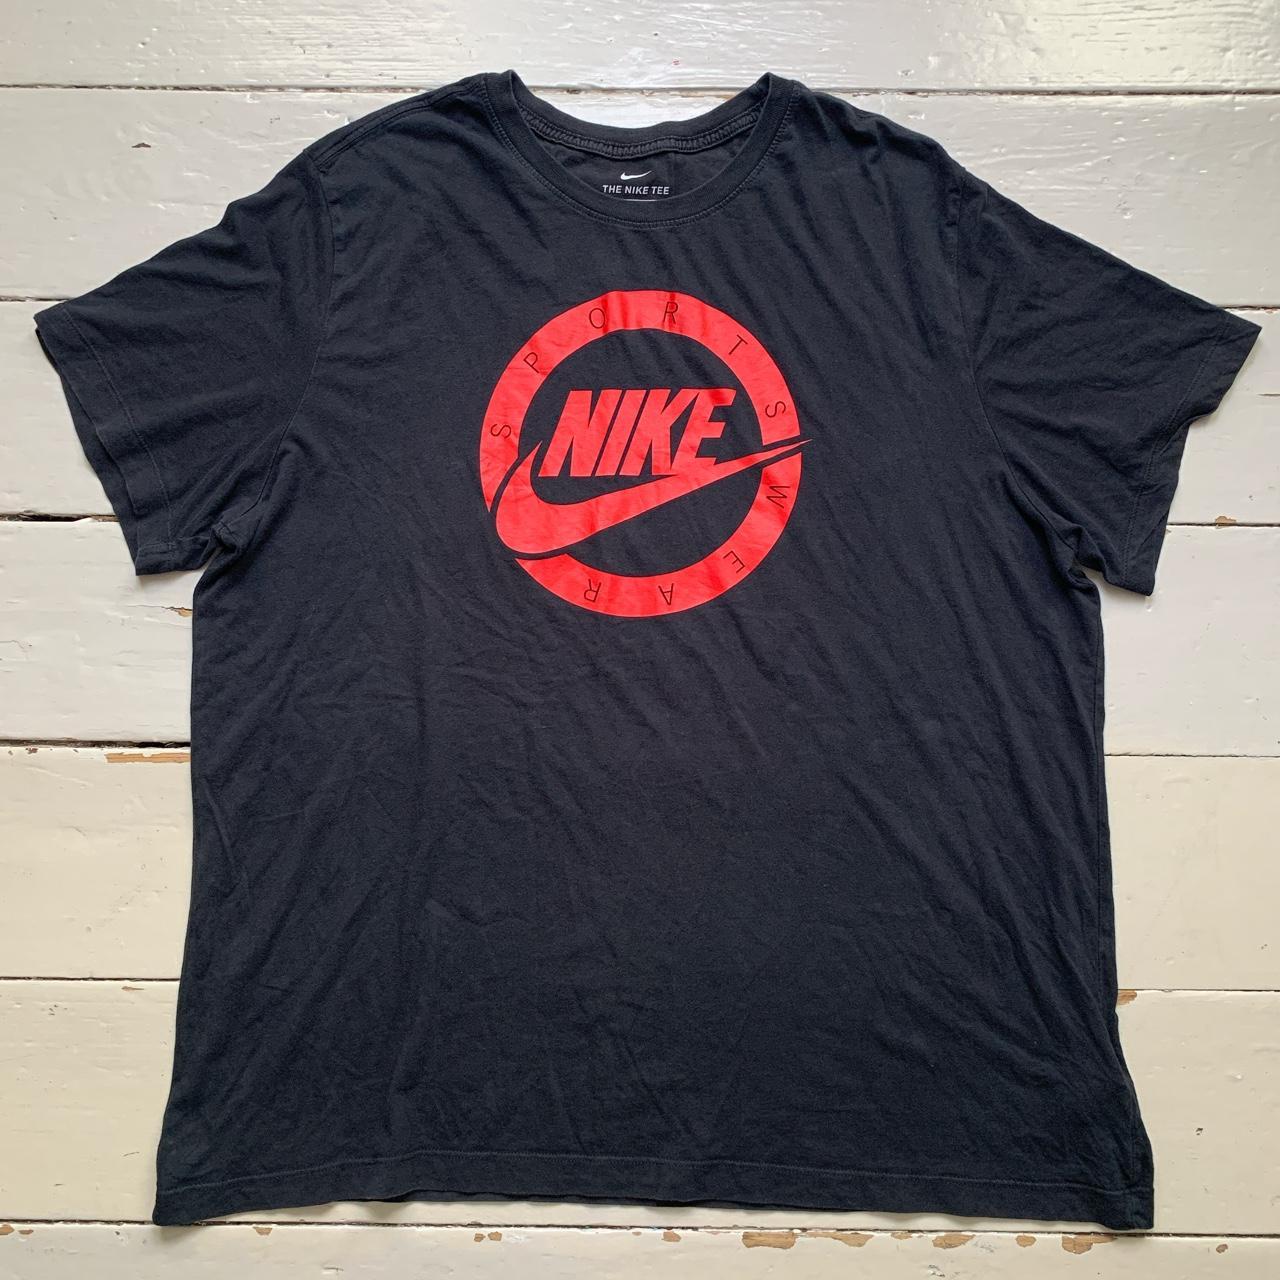 Nike Sportswear Black and Red T Shirt